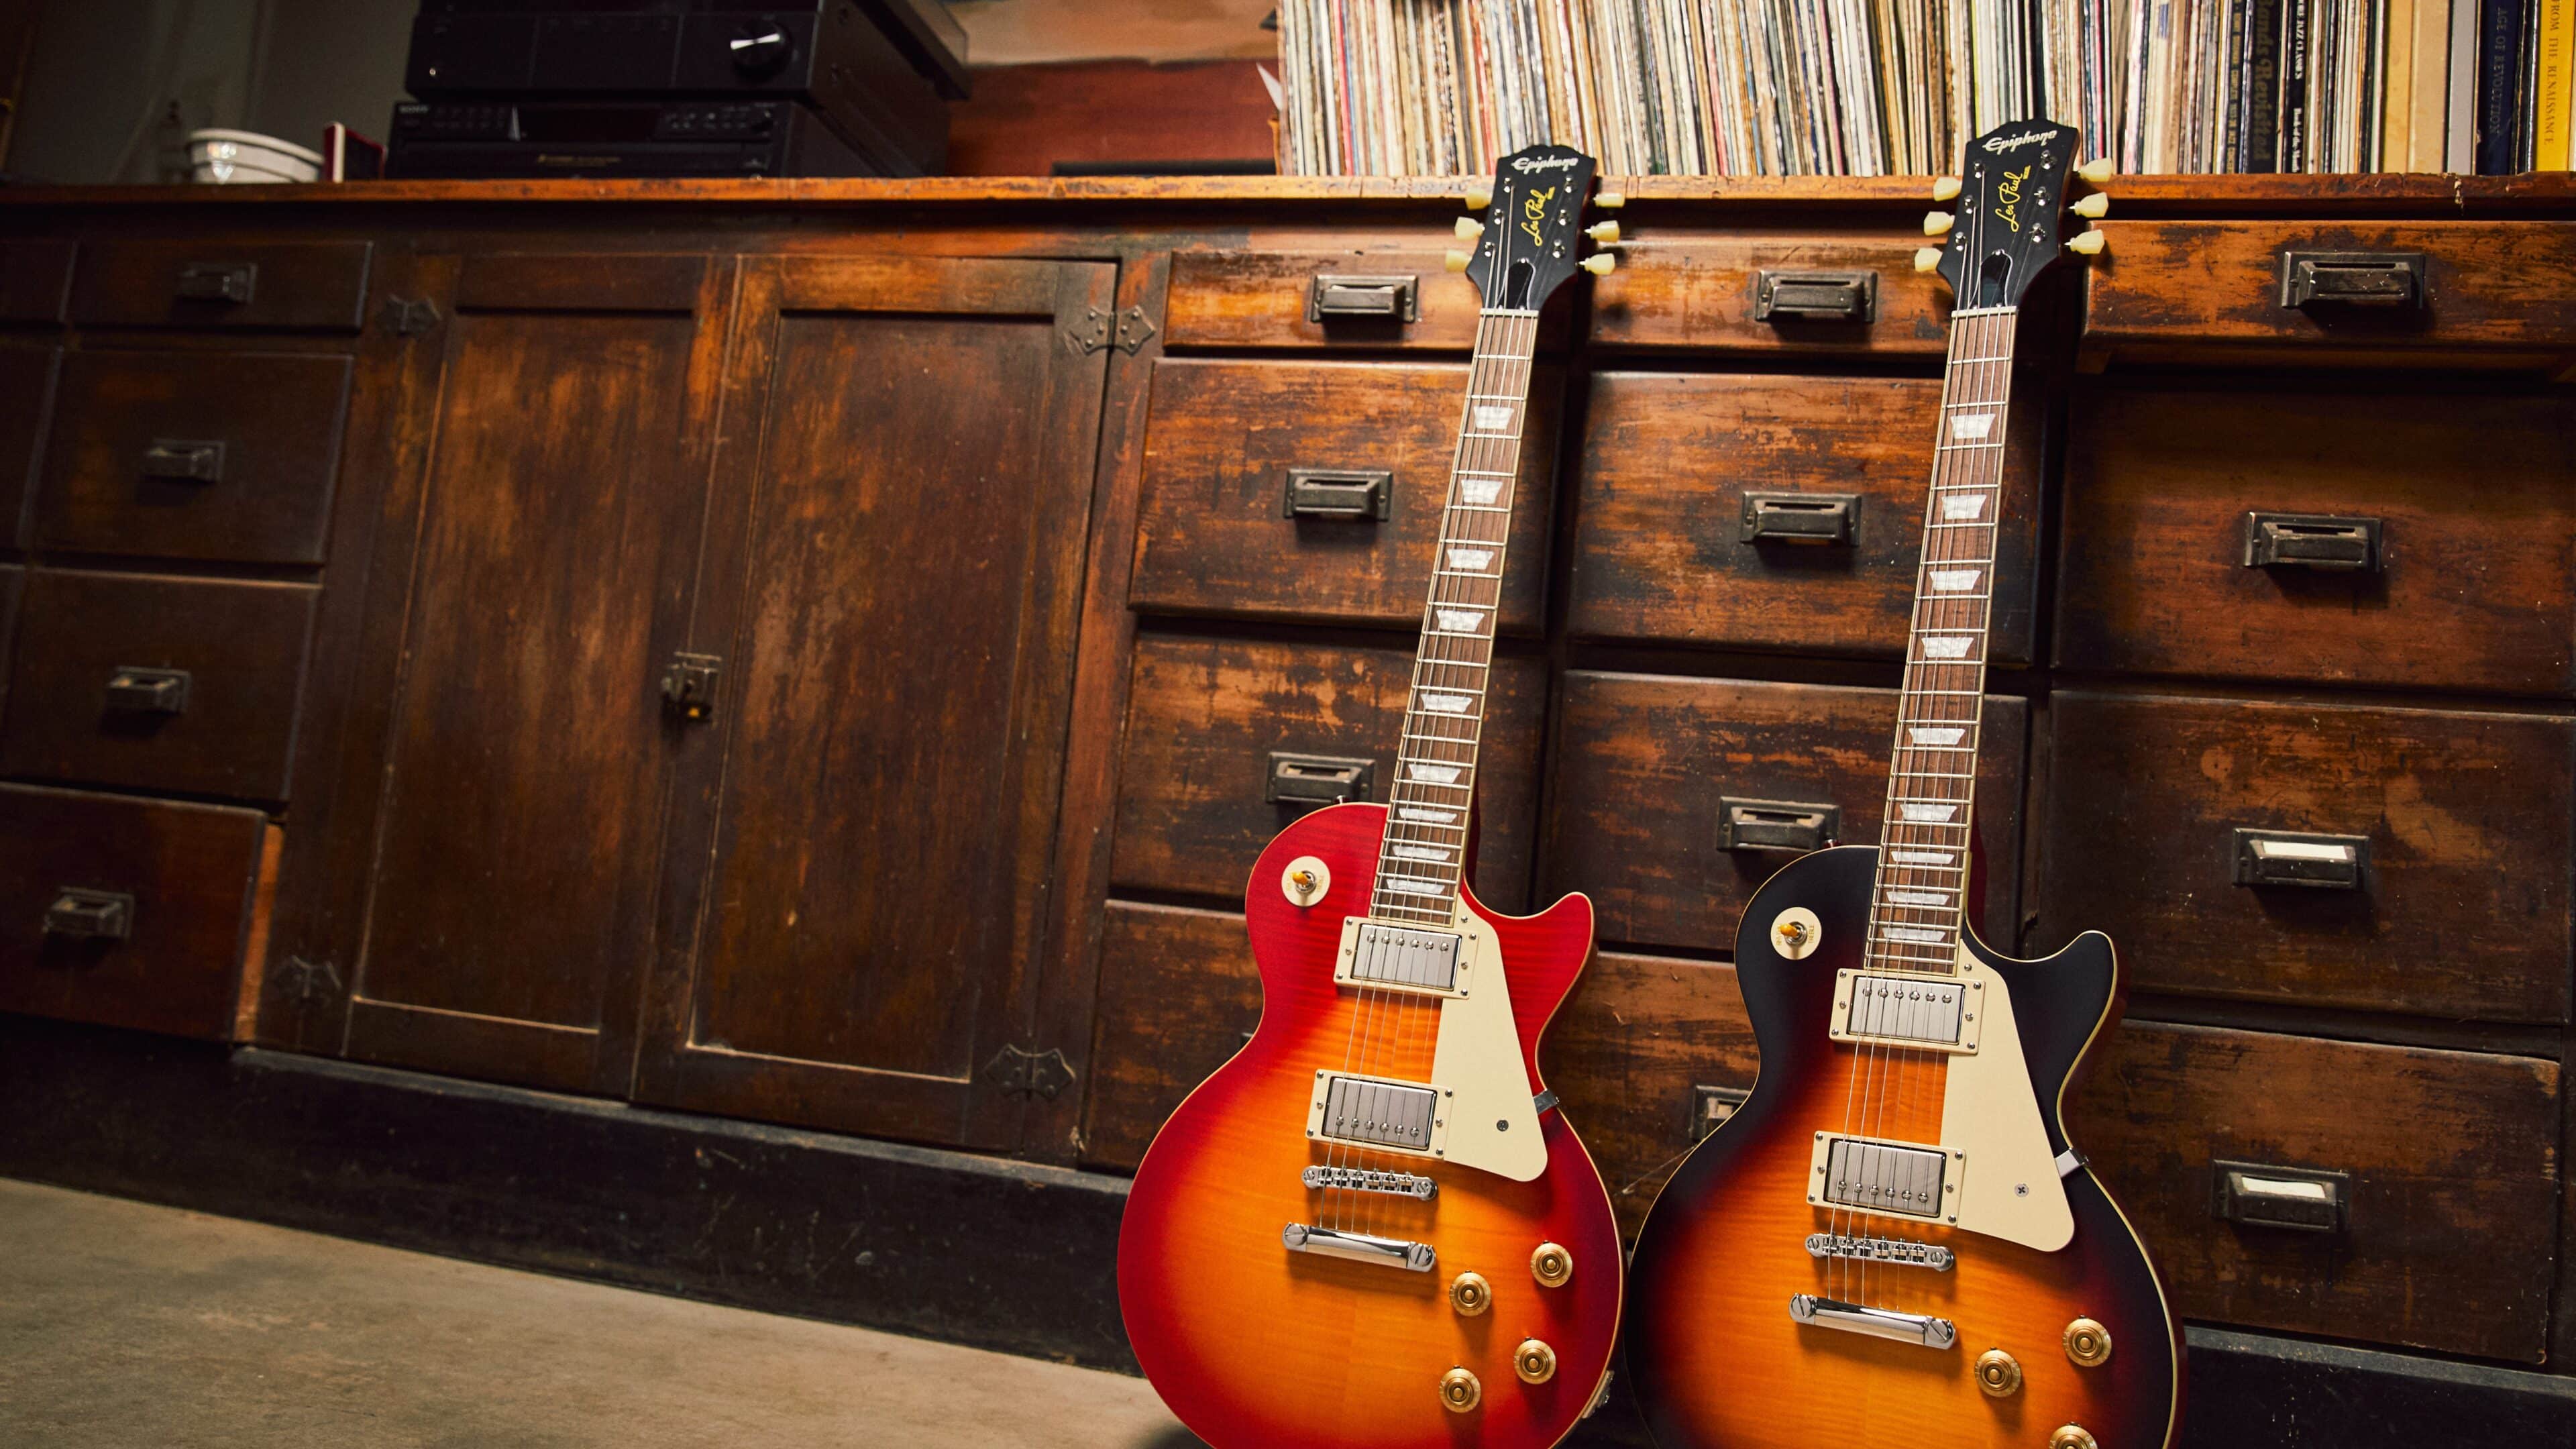 Epiphone Debuts Their ‘1959 Les Paul Standard’ In First Collaboration with Gibson Custom Shop